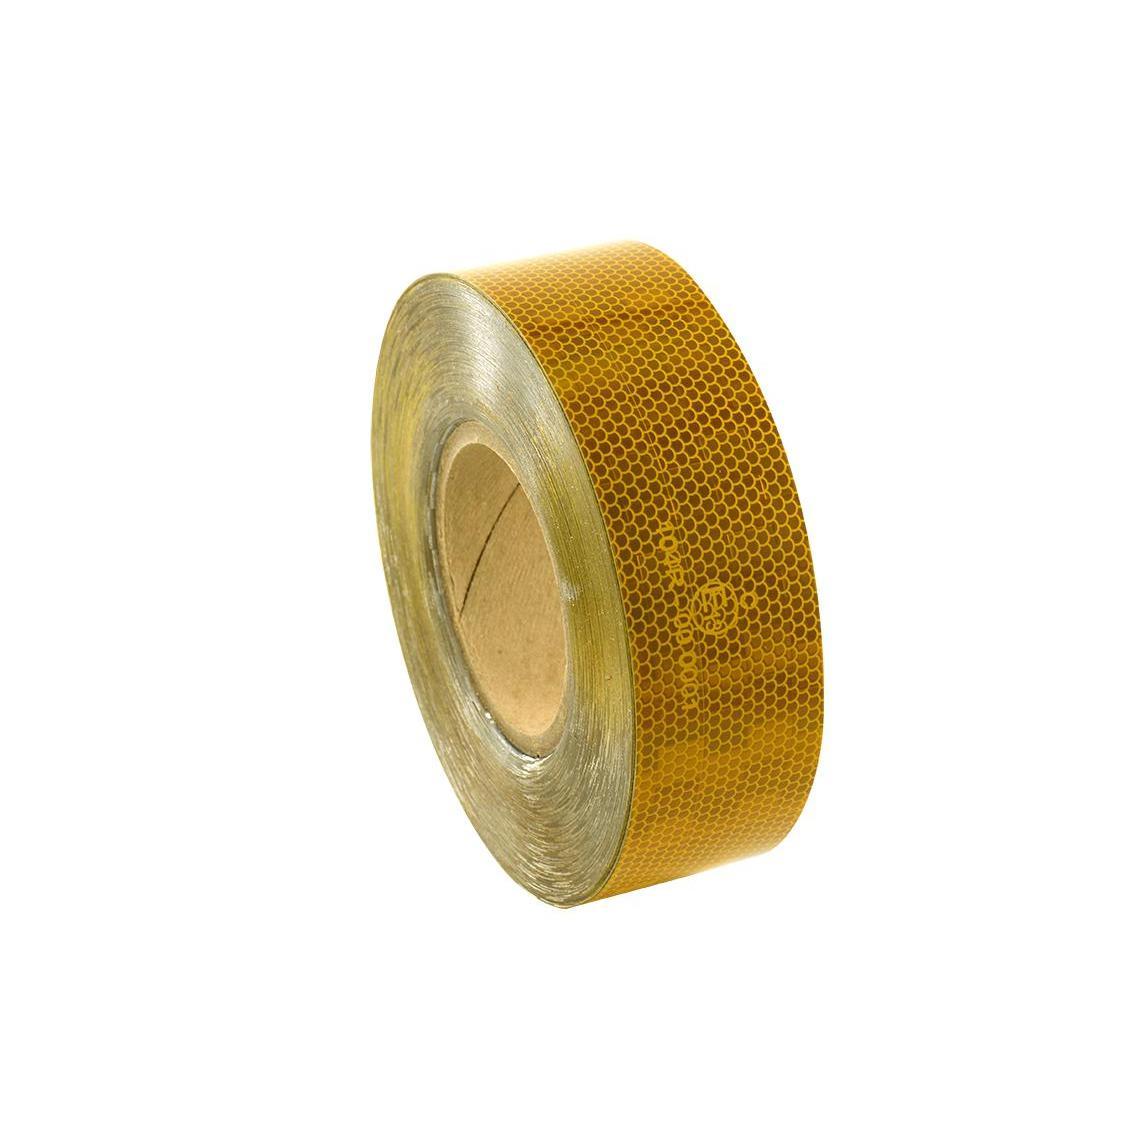 Reflective Conspicuity Tape SABS p/meter-Hardware Tape-3M-𝑤50mm-Yellow-diyshop.co.za